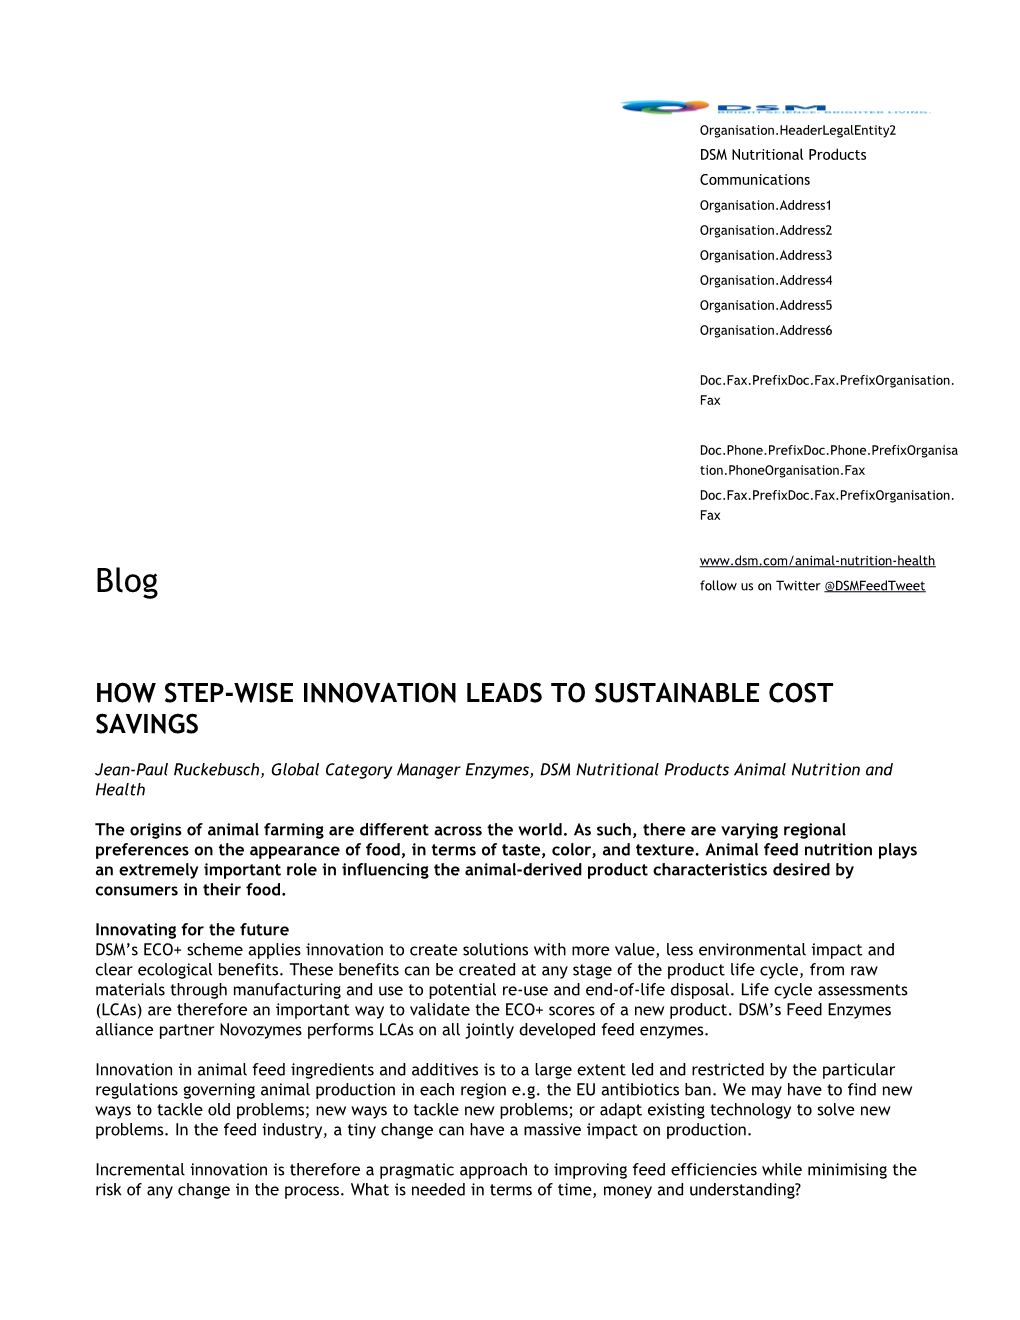 How Step-Wise Innovation Leads to Sustainable Cost Savings